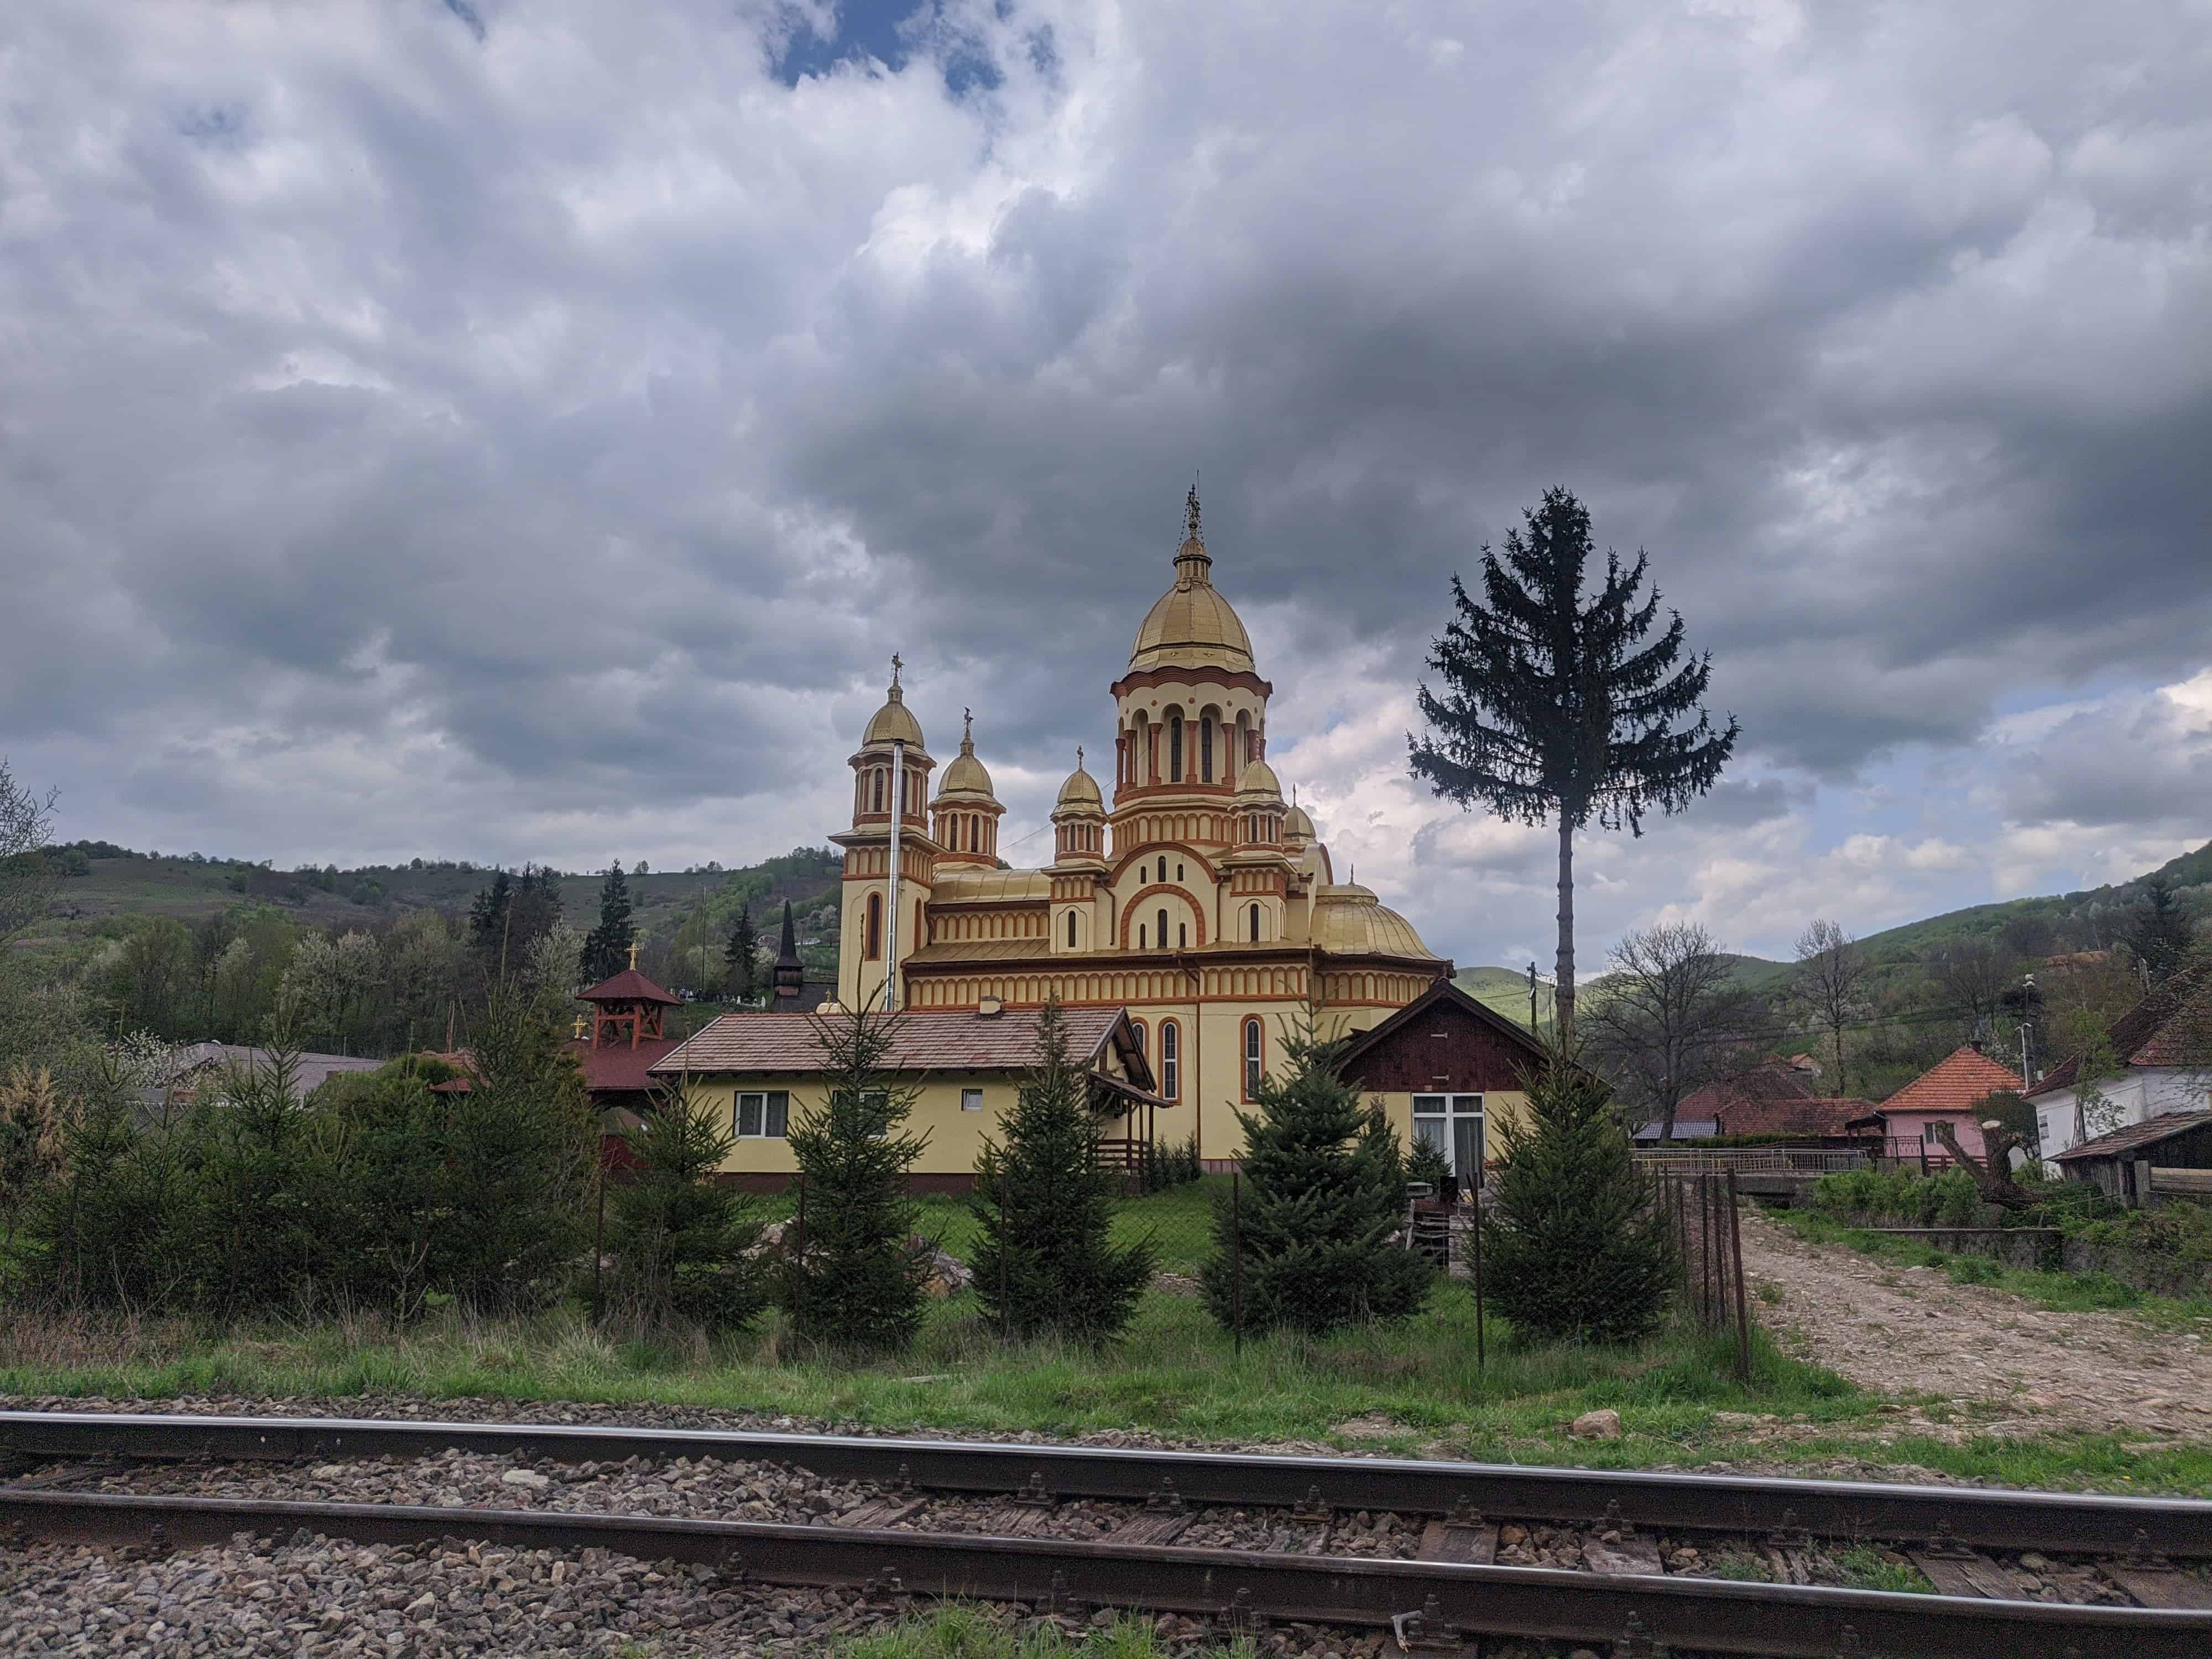 Following the understated railway tracks just over the border into Cluj County, with a rather tacky looking gilded chapel across the way.